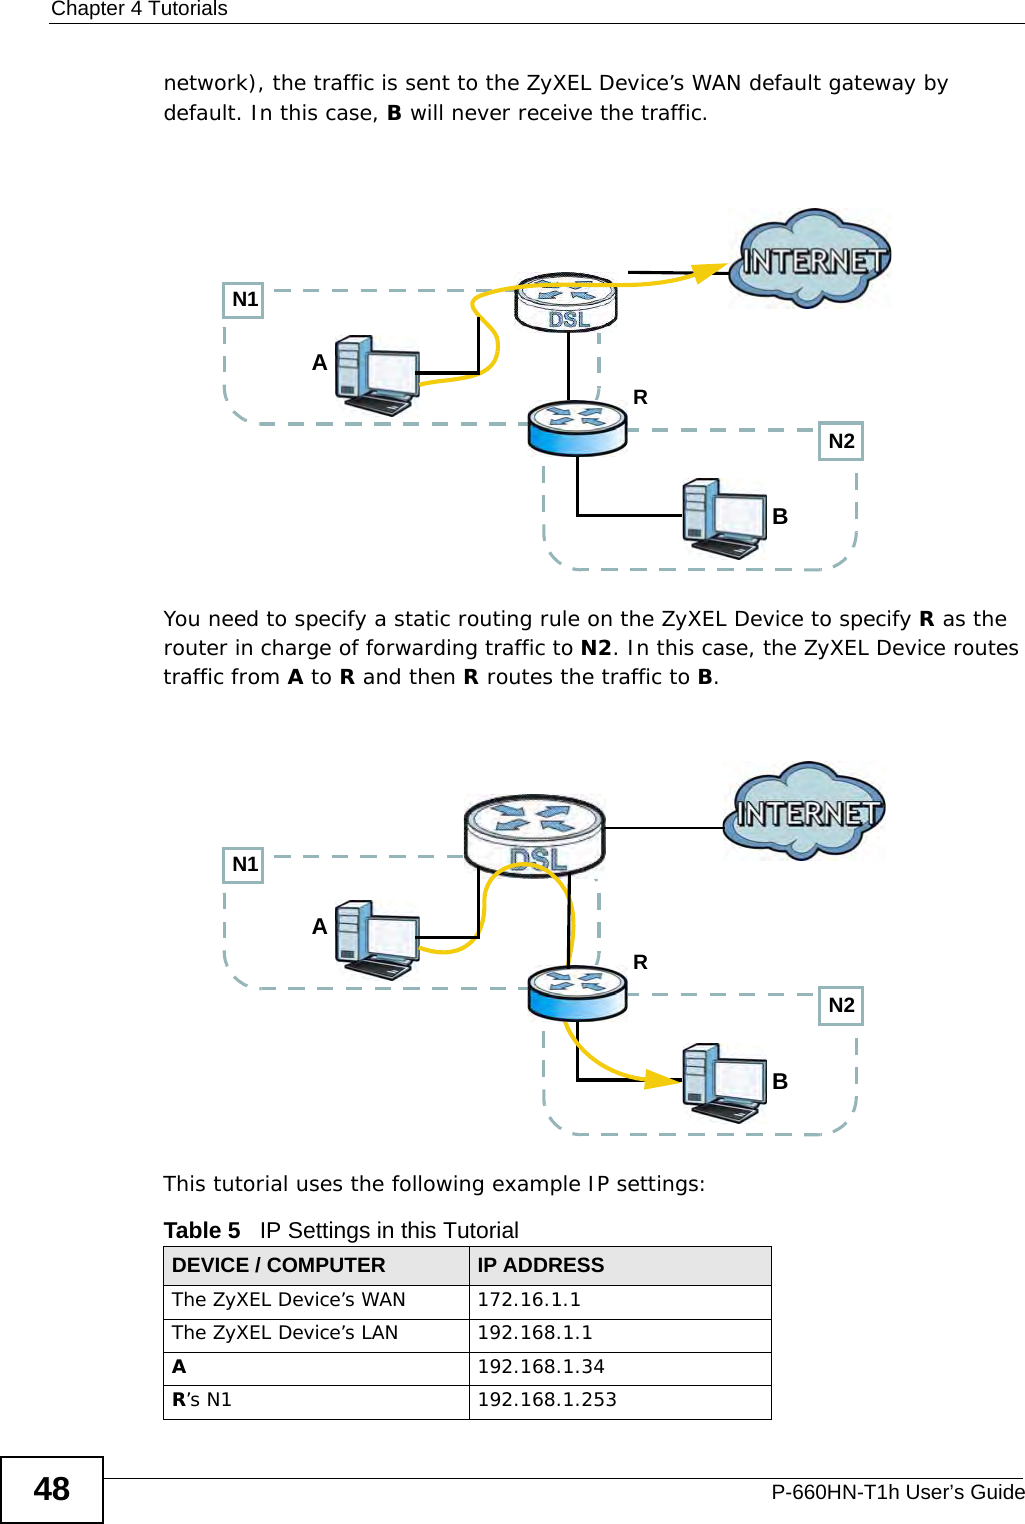 Chapter 4 TutorialsP-660HN-T1h User’s Guide48network), the traffic is sent to the ZyXEL Device’s WAN default gateway by default. In this case, B will never receive the traffic.You need to specify a static routing rule on the ZyXEL Device to specify R as the router in charge of forwarding traffic to N2. In this case, the ZyXEL Device routes traffic from A to R and then R routes the traffic to B.This tutorial uses the following example IP settings:Table 5   IP Settings in this TutorialDEVICE / COMPUTER IP ADDRESSThe ZyXEL Device’s WAN 172.16.1.1The ZyXEL Device’s LAN 192.168.1.1A192.168.1.34R’s N1  192.168.1.253N2BN1ARN2BN1AR